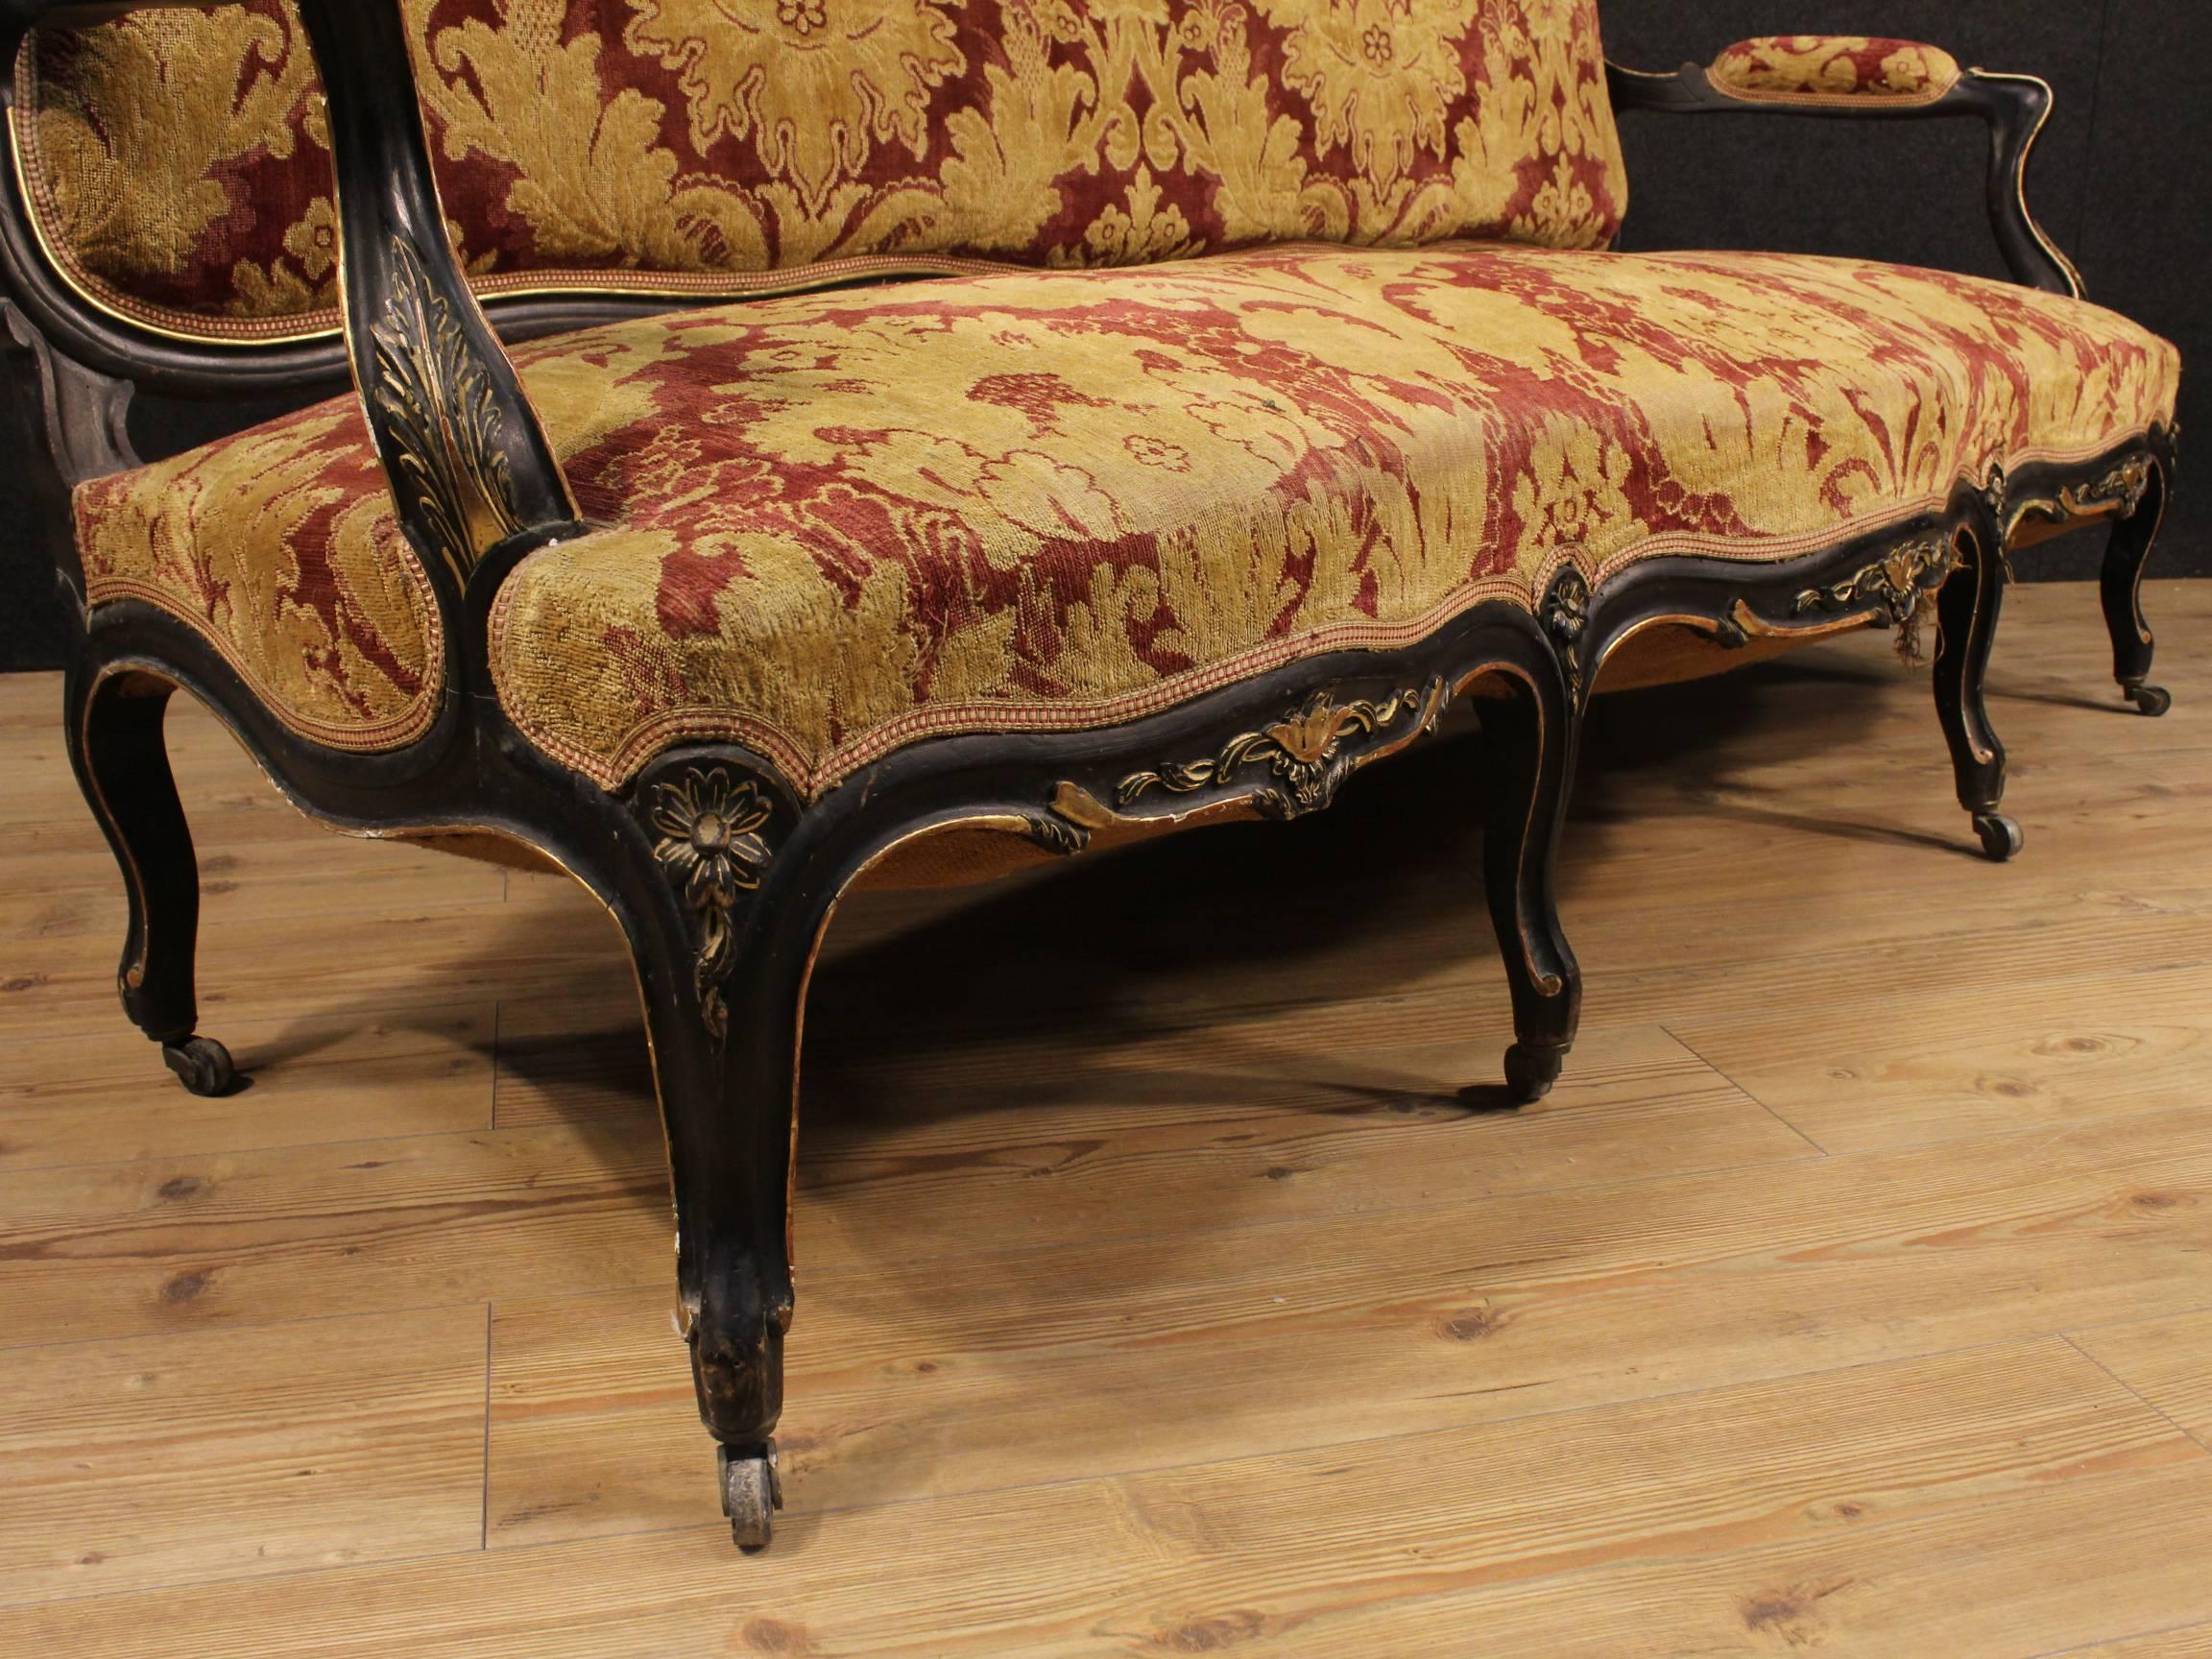 20th Century French Sofa in Damask Velvet In Good Condition In Vicoforte, Piedmont